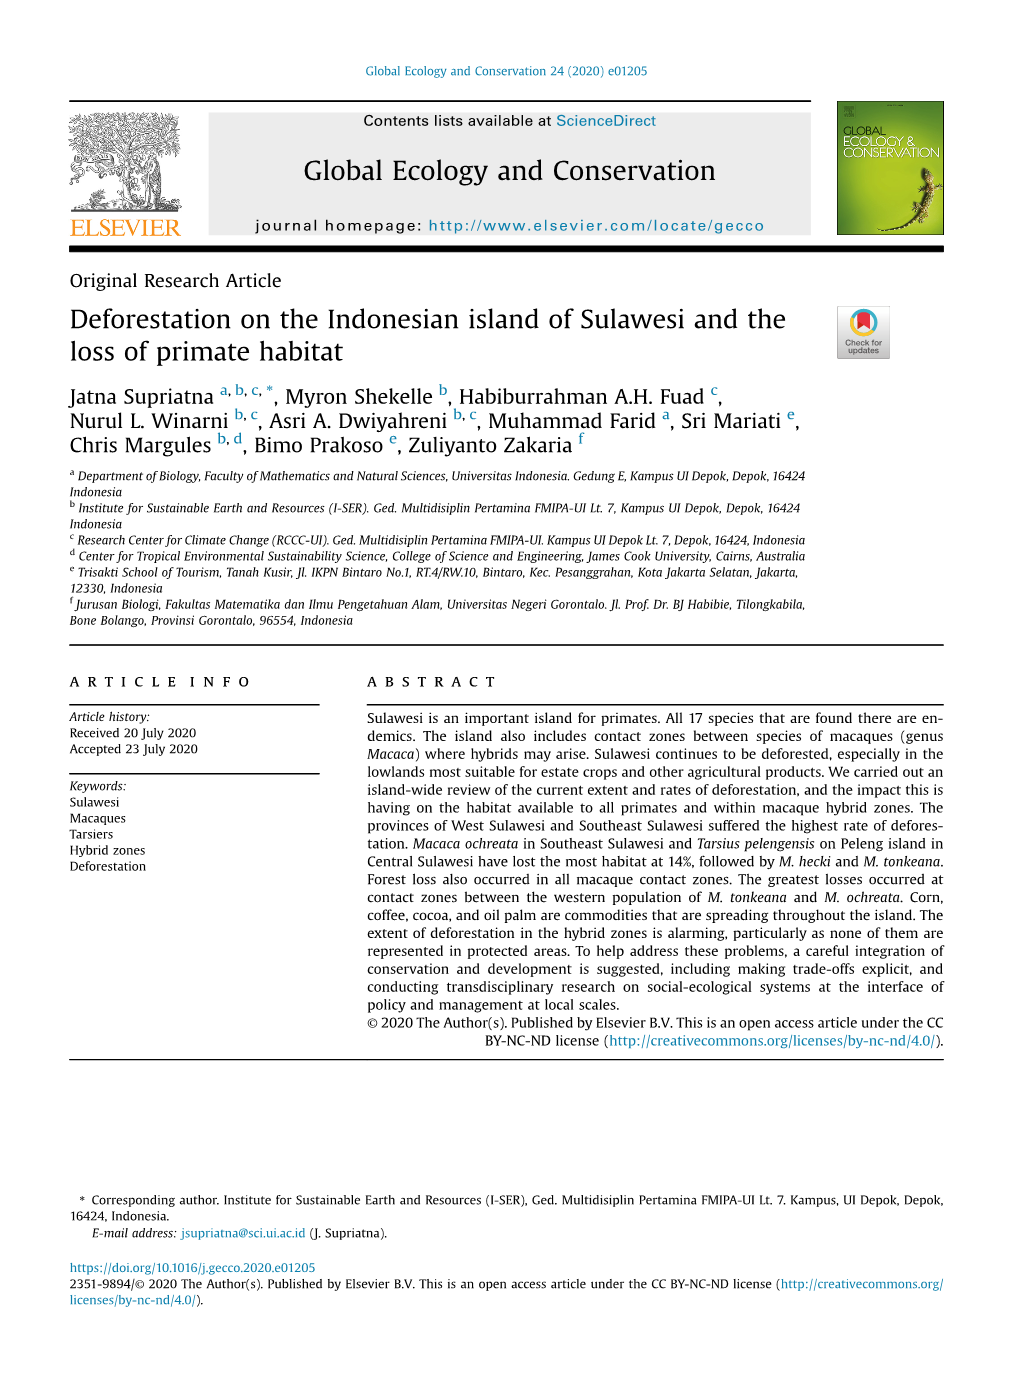 Deforestation on the Indonesian Island of Sulawesi and the Loss of Primate Habitat